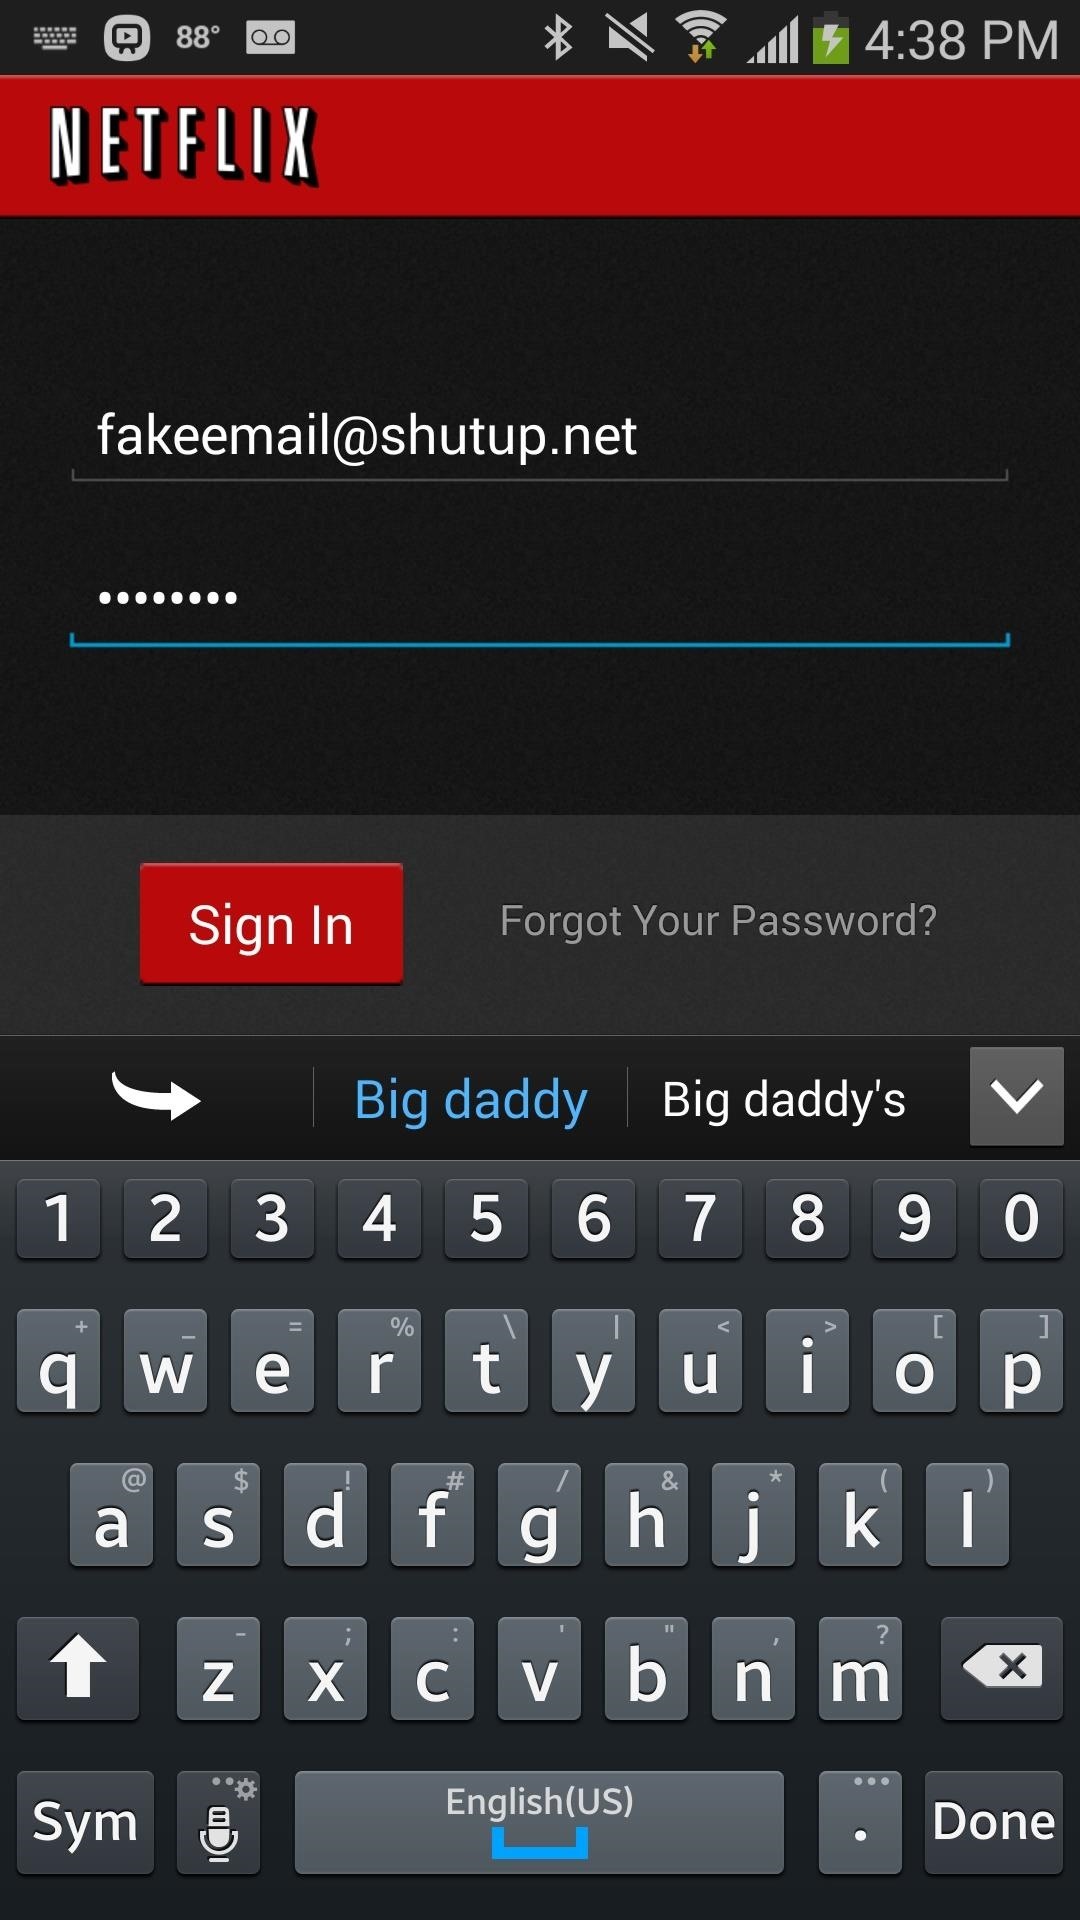 How to Enable Autocorrect & Predictions in Any Text Field on Your Galaxy Note 3